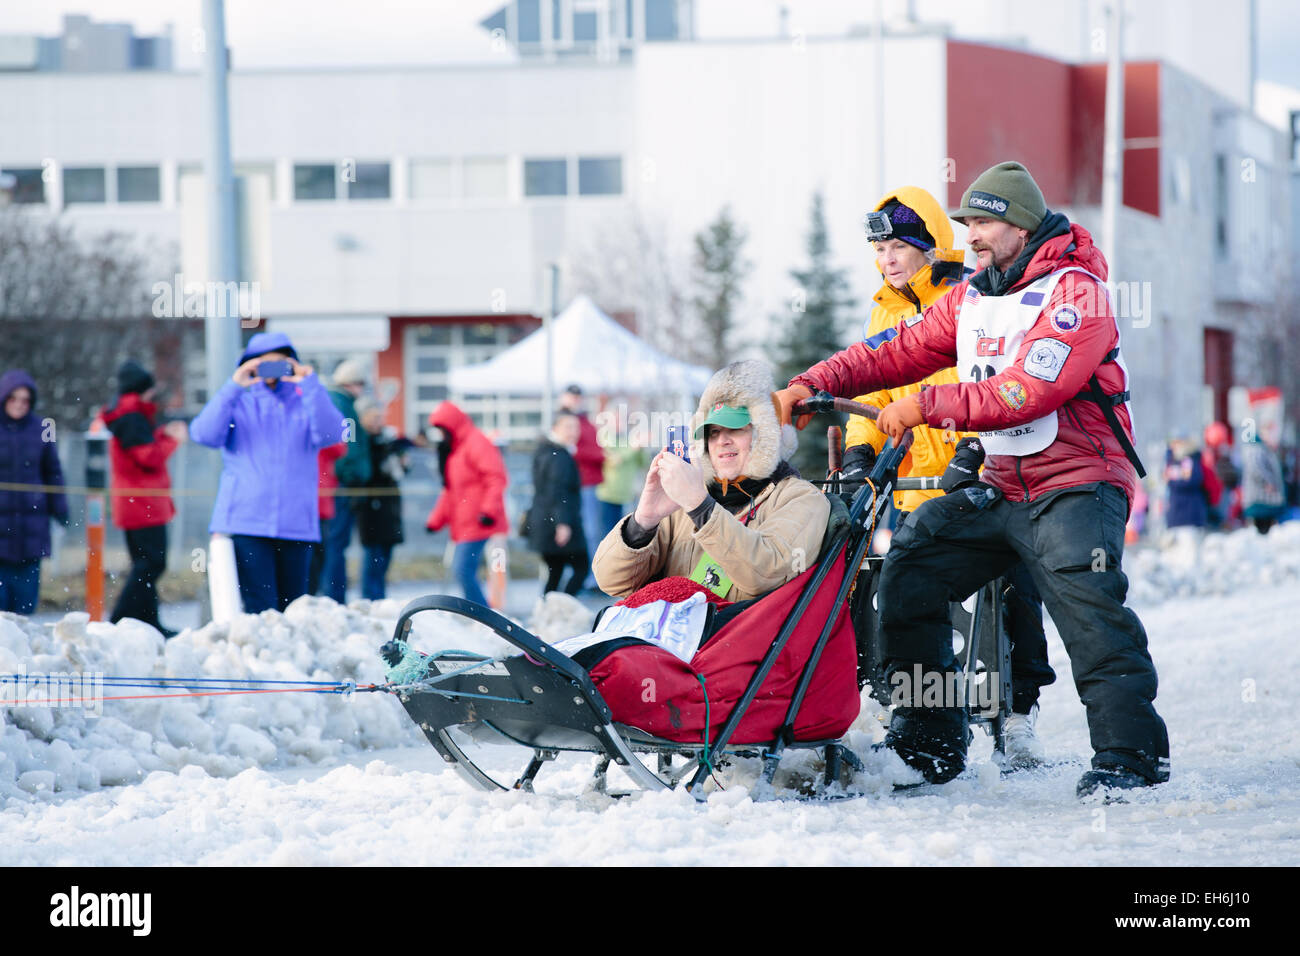 Four-time Iditarod winner Lance Mackey turned from Fourth Avenue onto Cordova Street in downtown Anchorage, Alaska on March 7, 2015 at the Ceremonial Start to the 2015 Iditarod Sled Dog Race. The race will resume with the official start in Fairbanks on March 9. Photo: Joshua Corbett/dpa (zu dpa: Alaska, Land des Hechelns: «Das härteste Schlittenrennen der Welt» vom 08.03.2015) Stock Photo